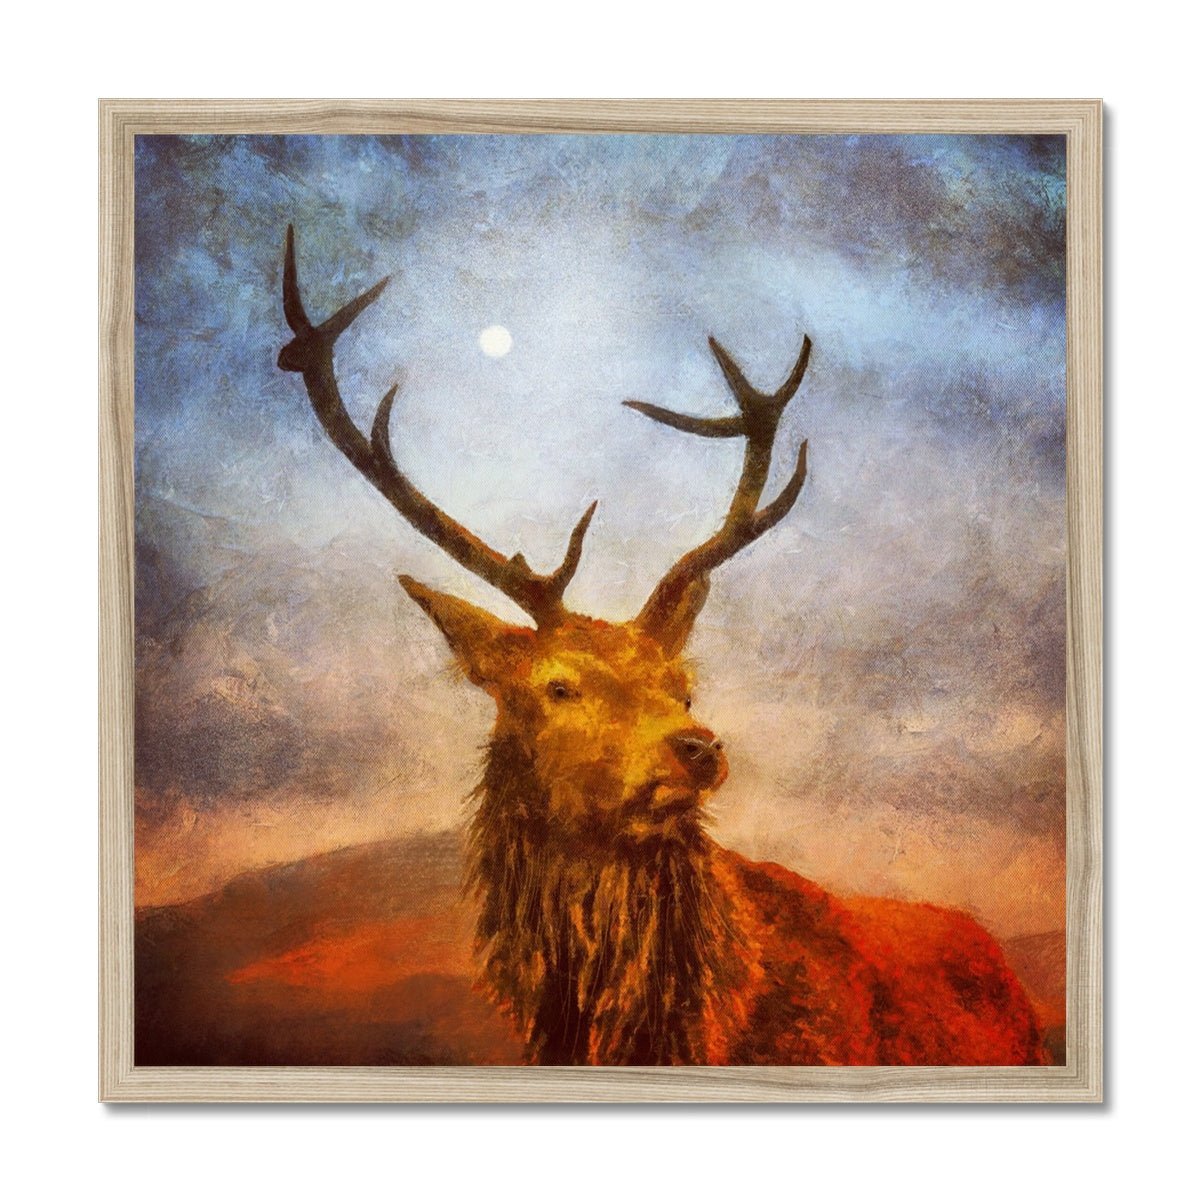 A Moonlit Highland Stag Painting | Framed Prints From Scotland-Framed Prints-Scottish Highlands & Lowlands Art Gallery-20"x20"-Natural Frame-Paintings, Prints, Homeware, Art Gifts From Scotland By Scottish Artist Kevin Hunter